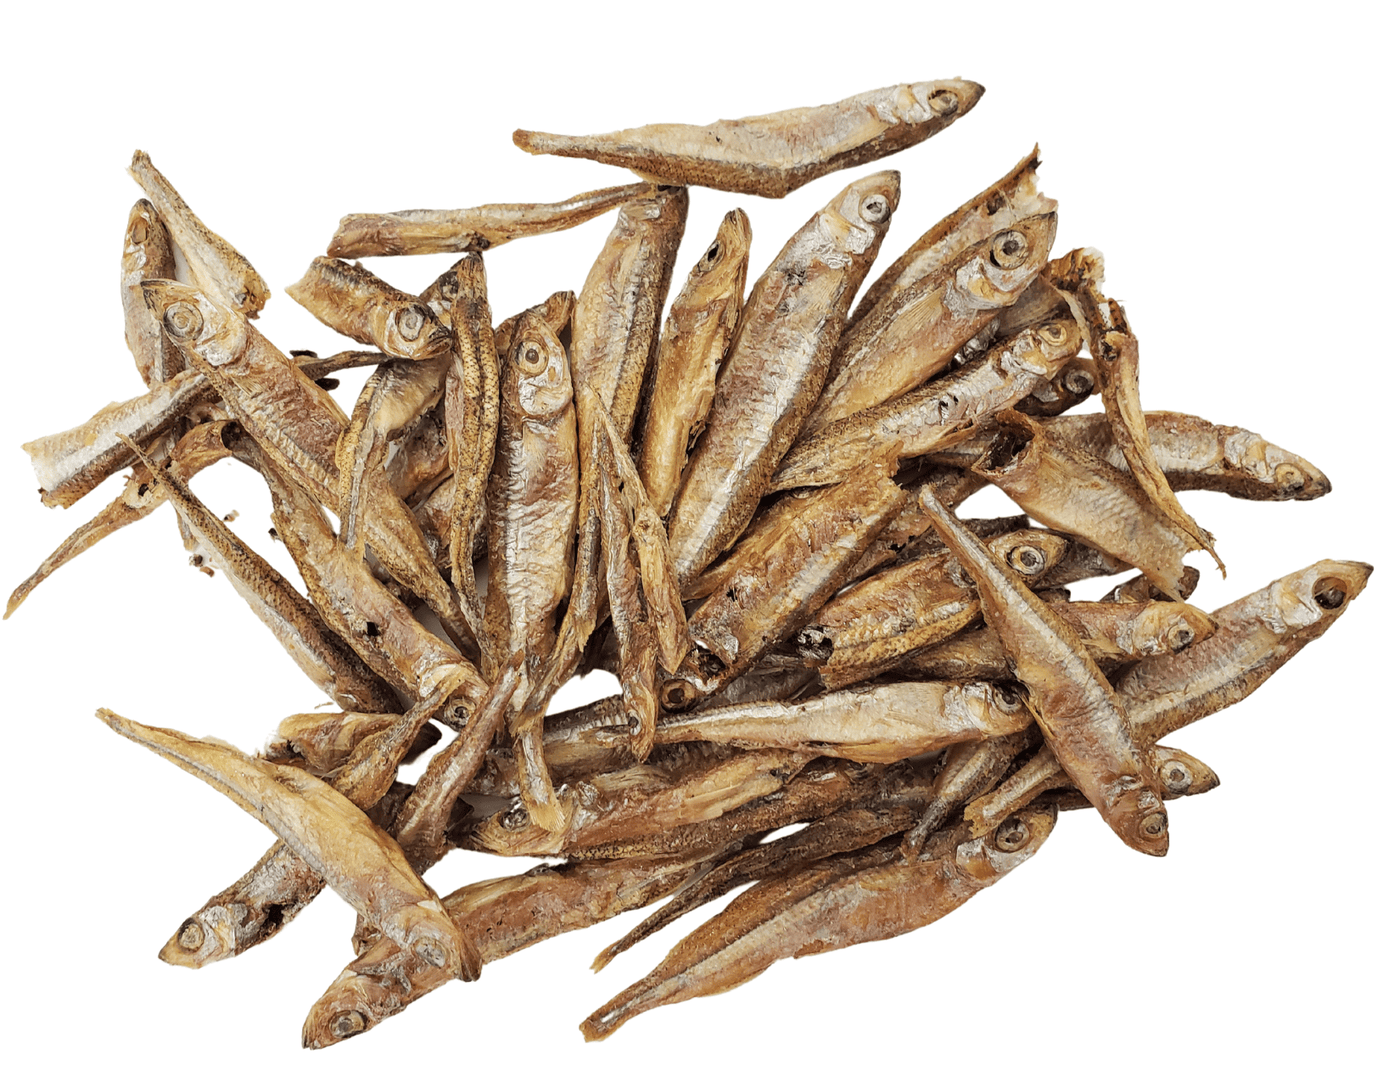 Dehydrated Lake Smelts - Gamesome - PetToba-Gamesome